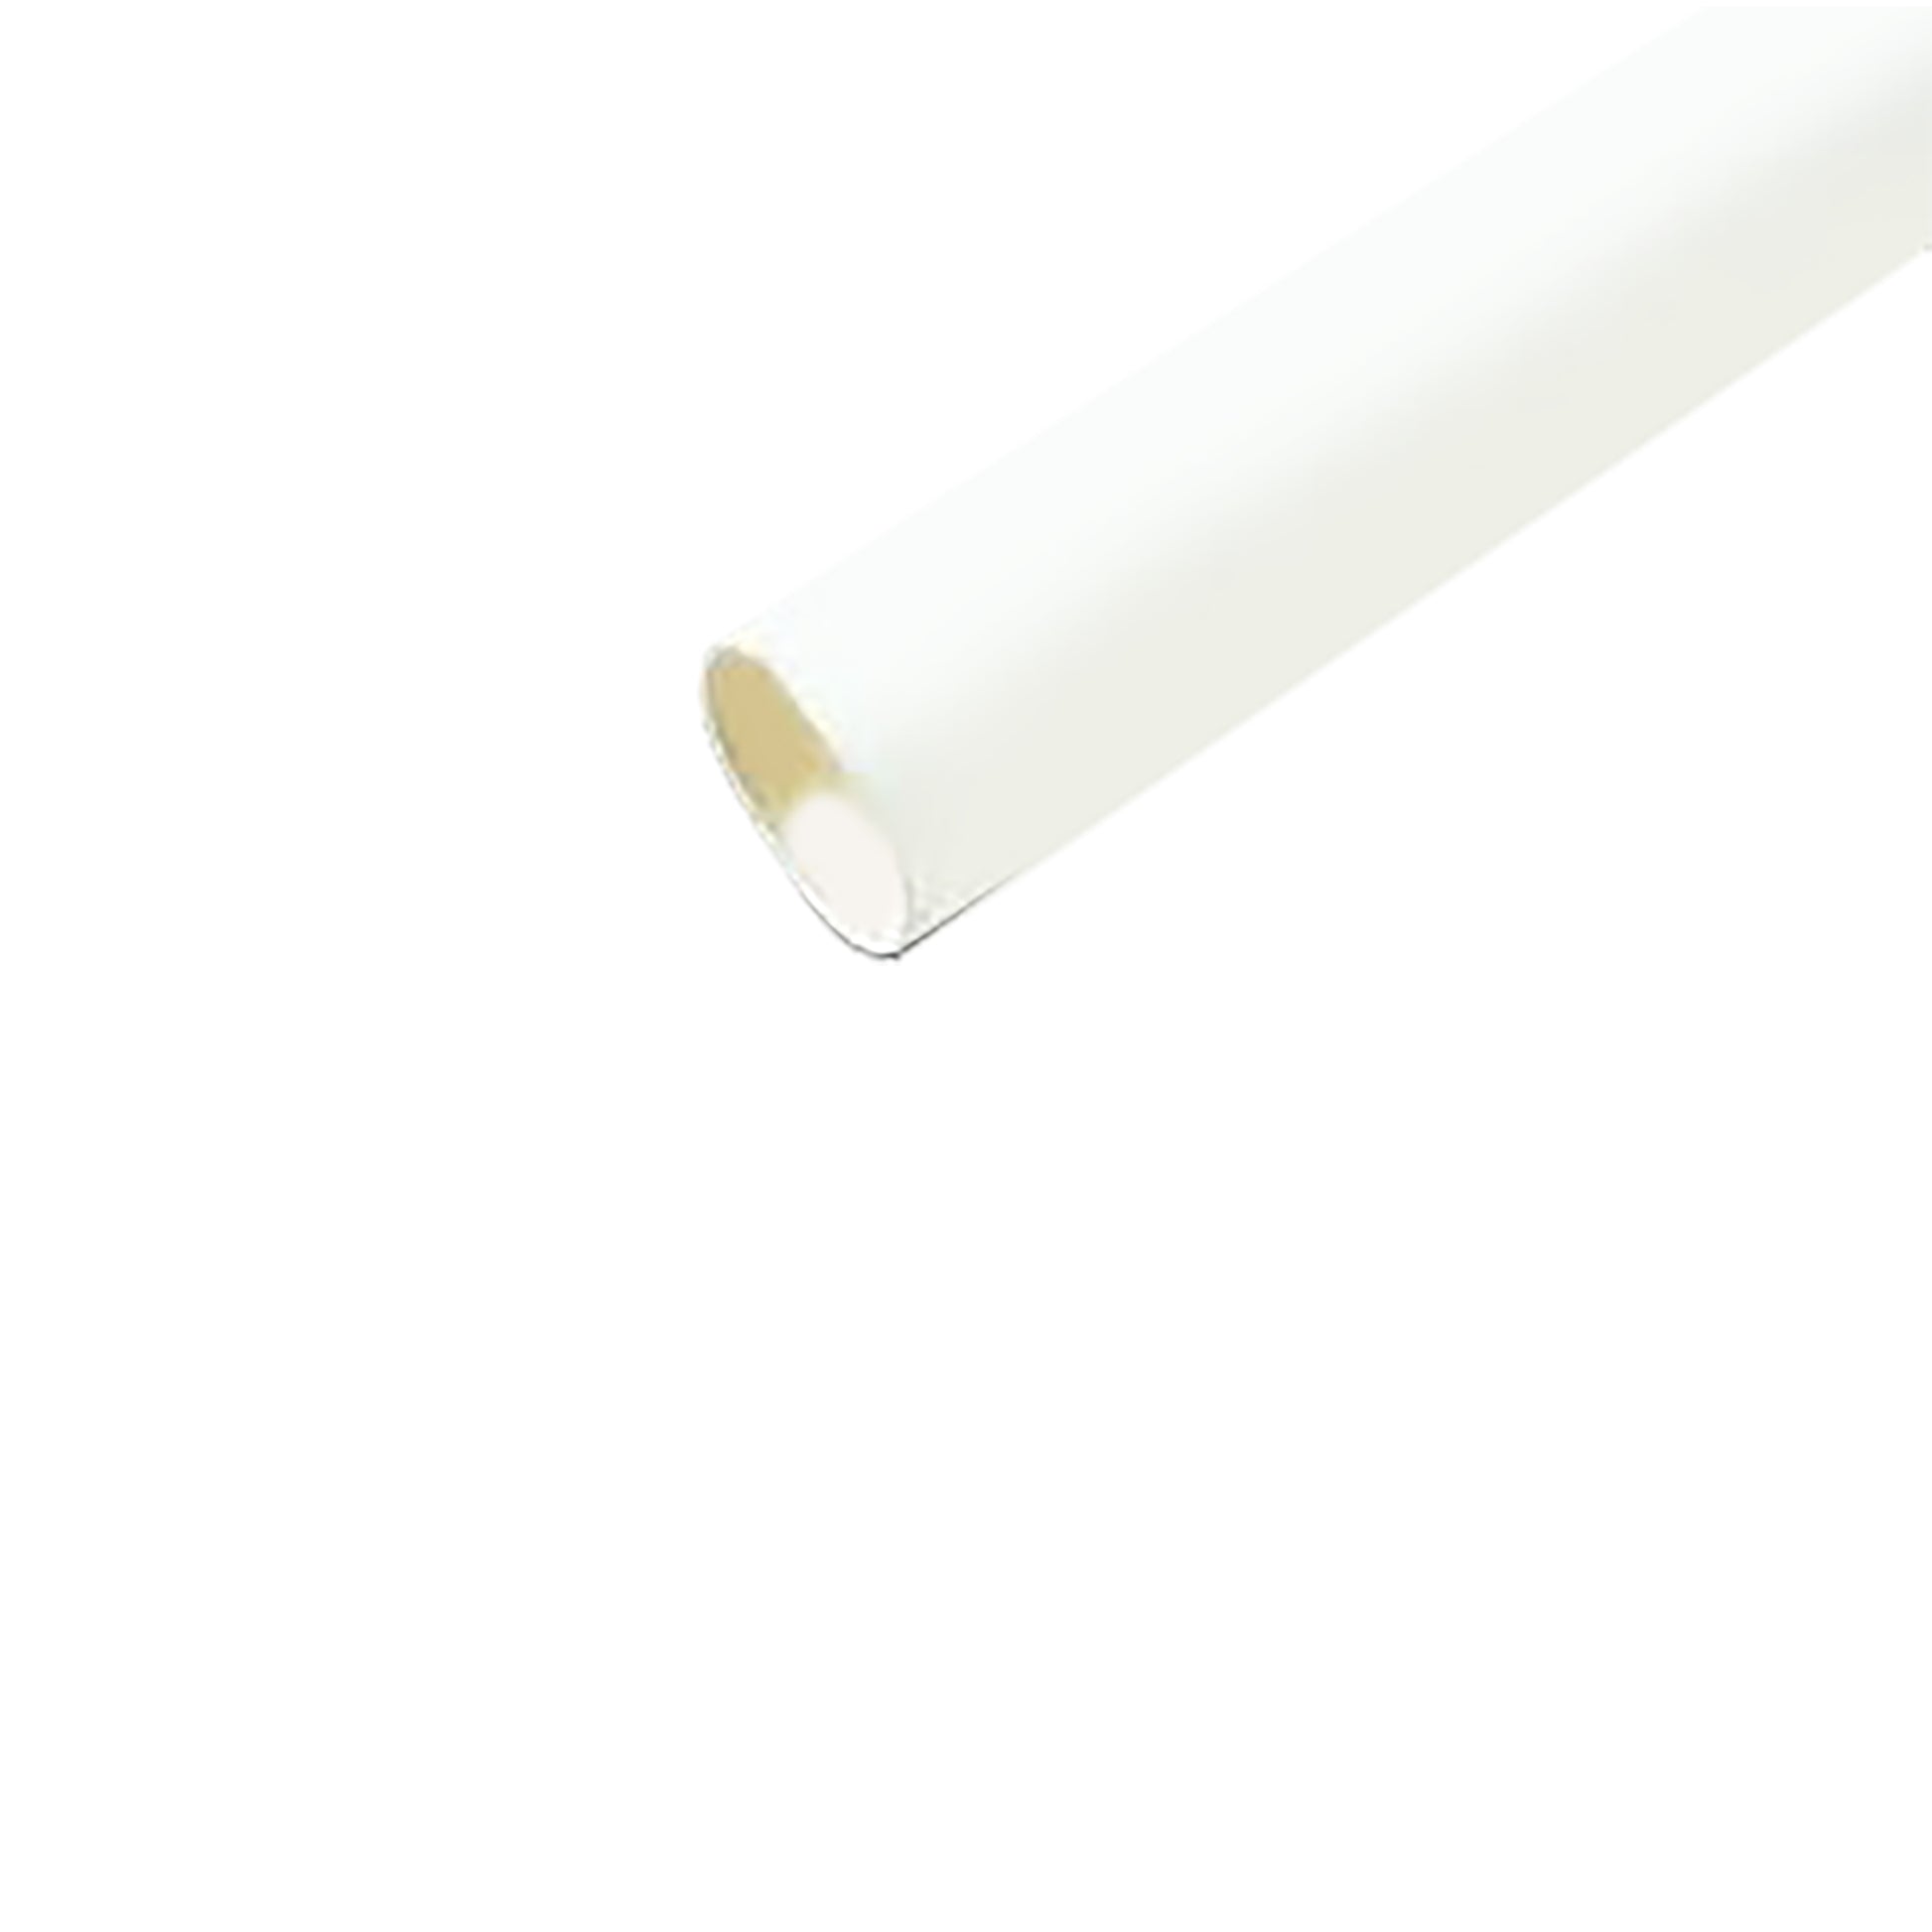 Flexible Thin Single Wall Non-Adhesive Heat Shrink Tubing 2:1 White 1/2" ID - 12" Inch 10 Pack